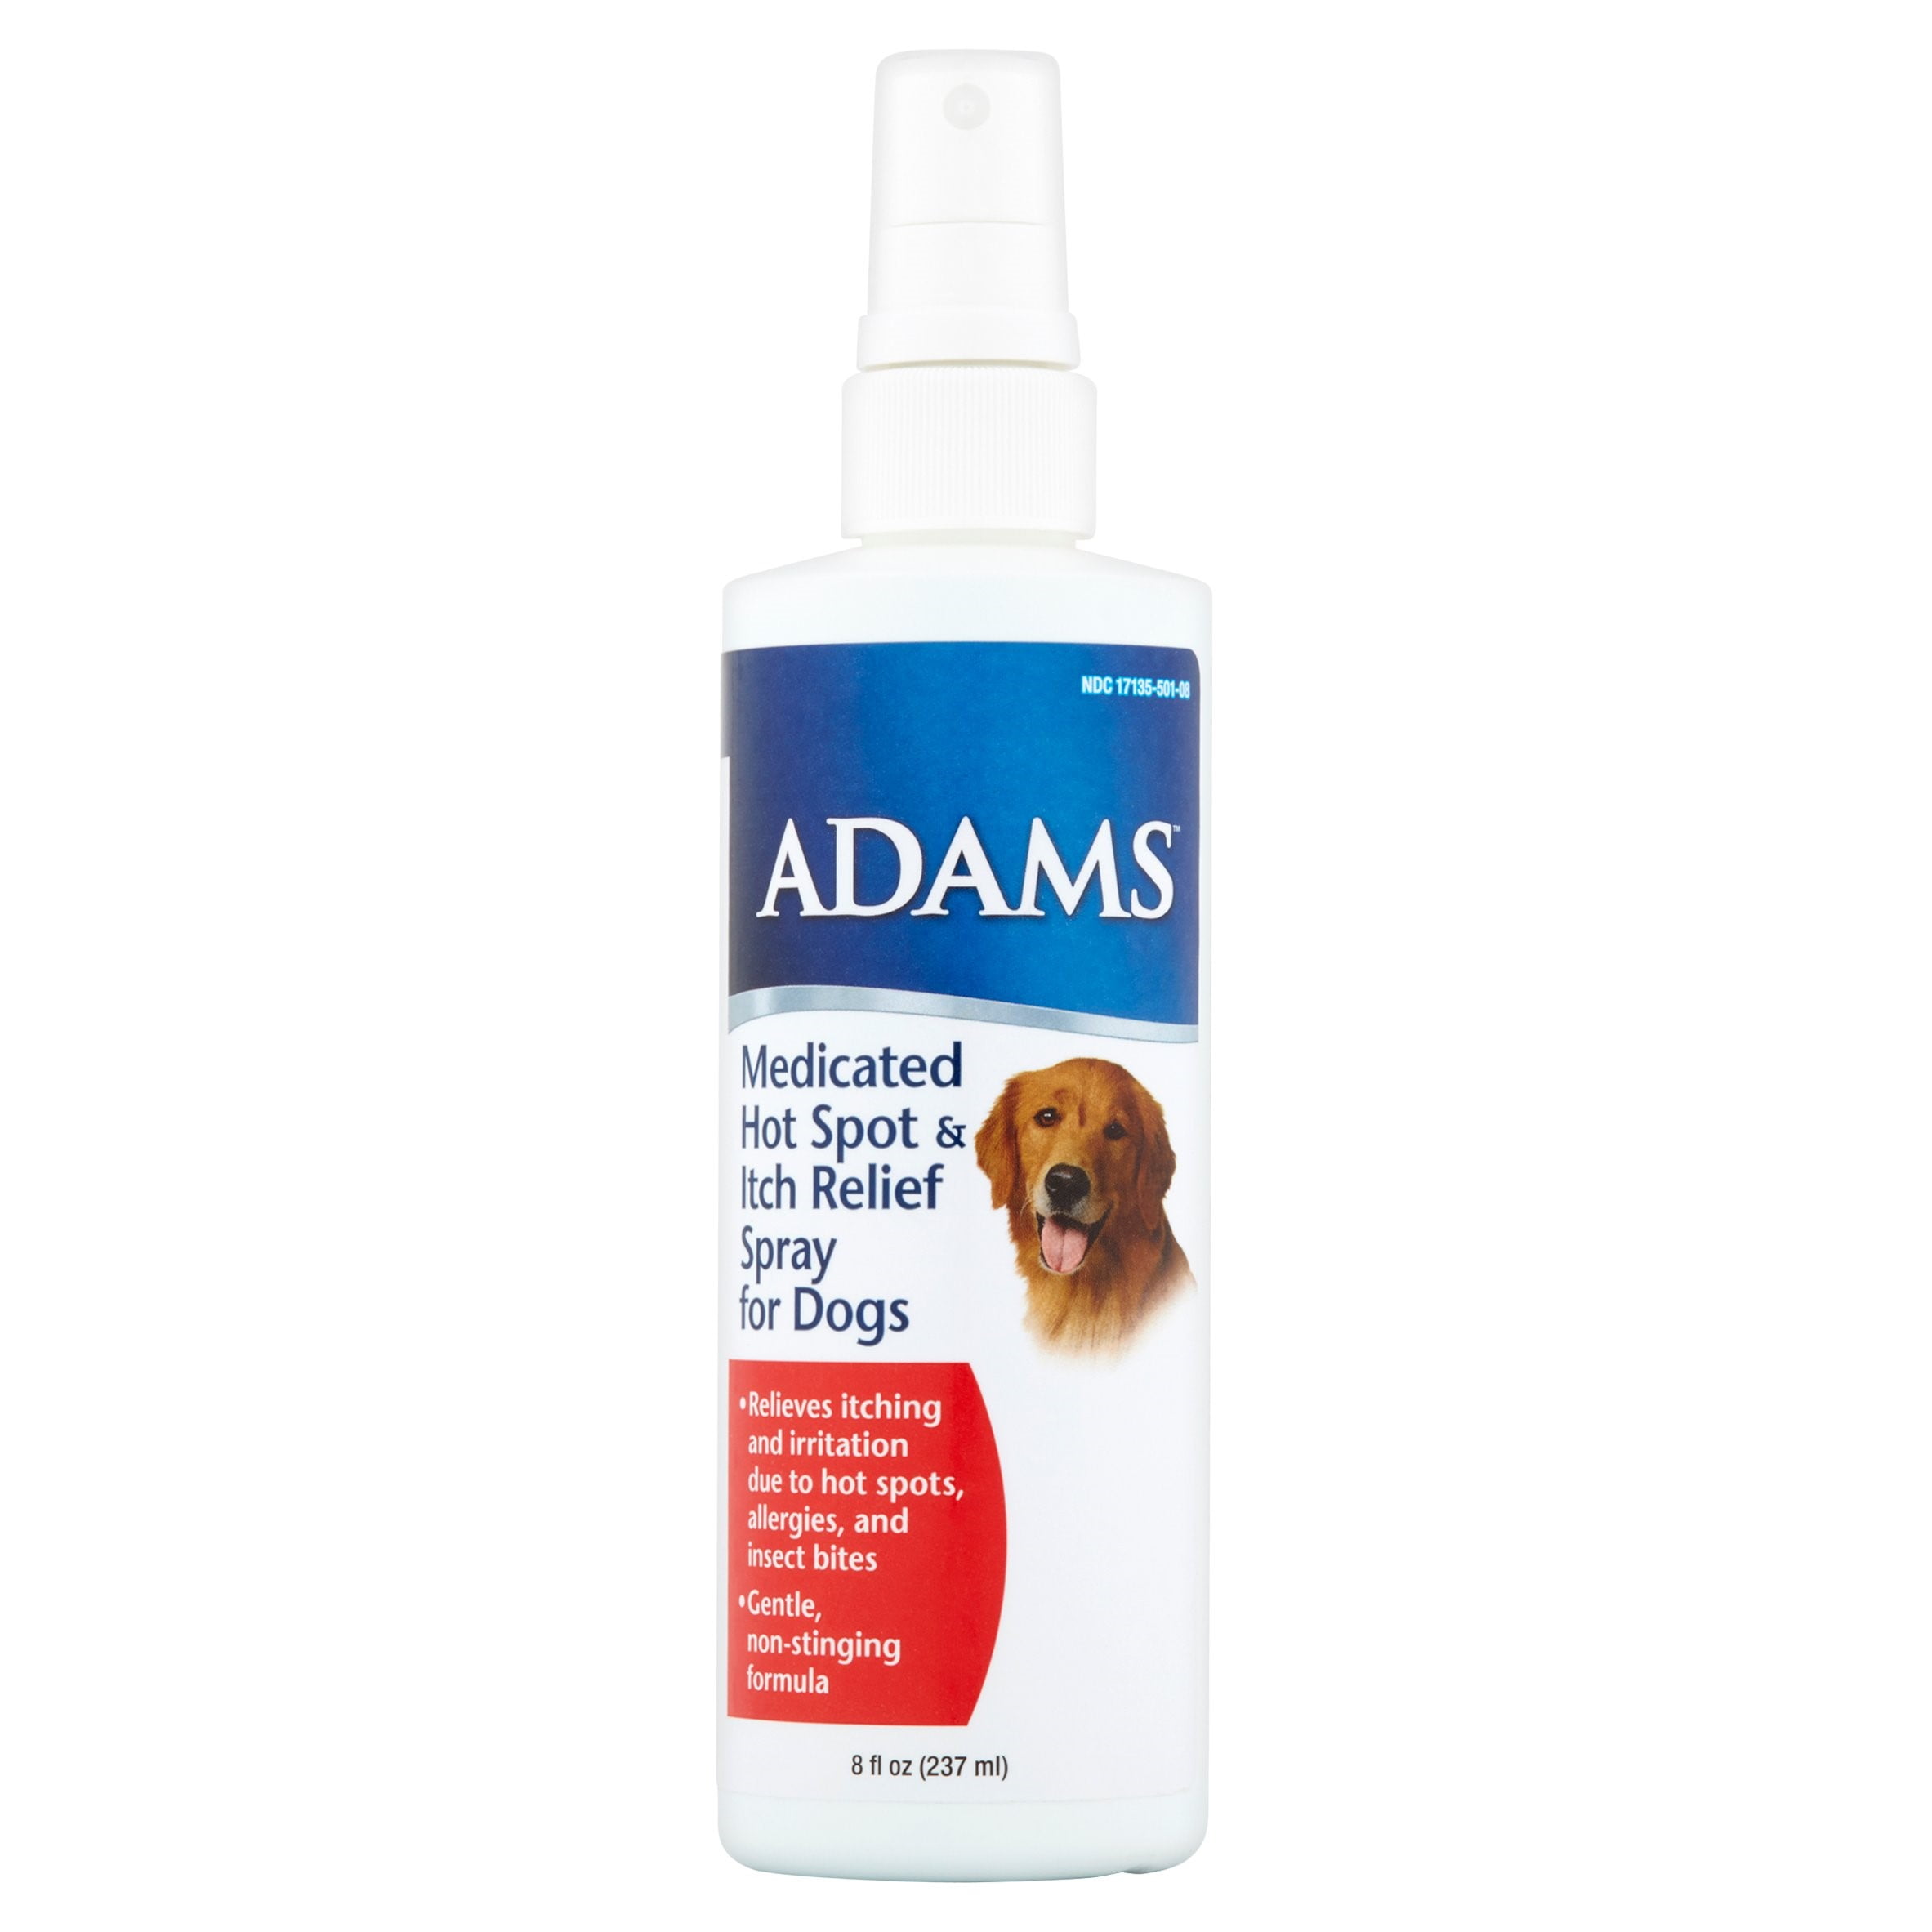 Adams Medicated Hot Spot and Itch Relief Spray for Dogs, 8 Oz